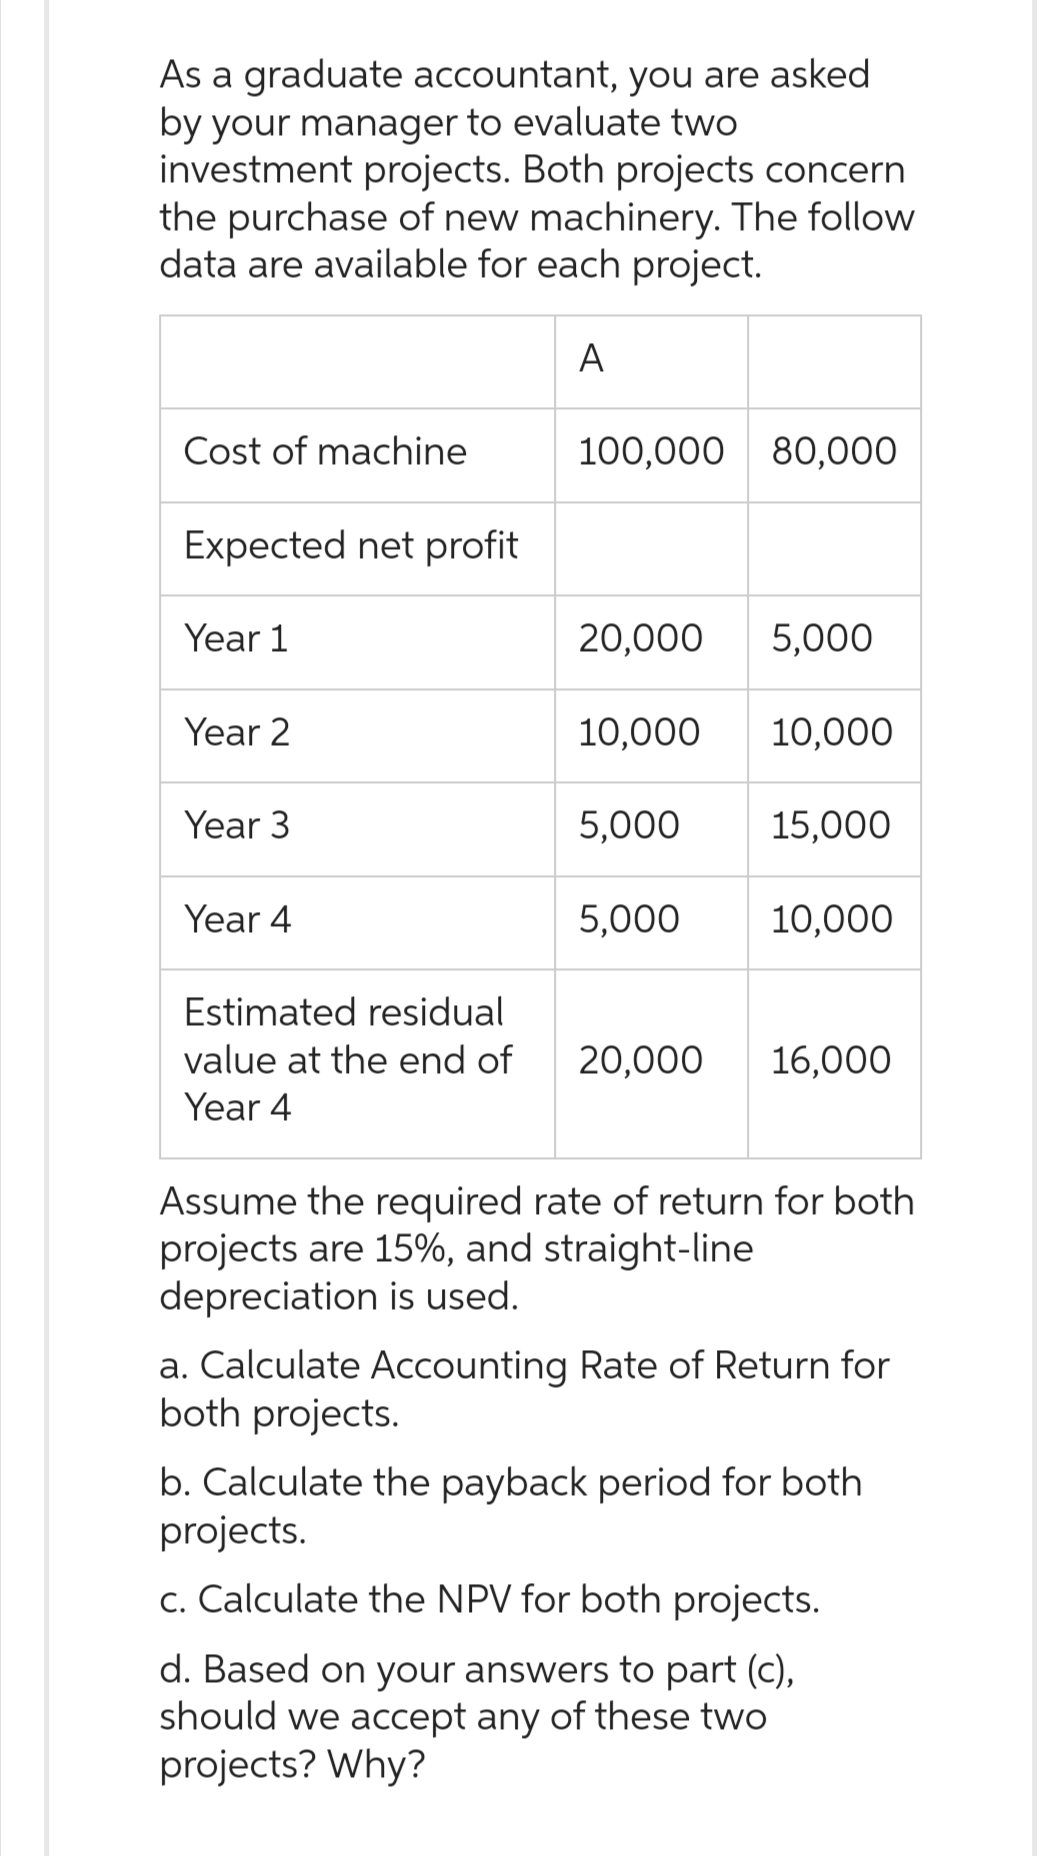 As a graduate accountant, you are asked
by your manager to evaluate two
investment projects. Both projects concern
the purchase of new machinery. The follow
data are available for each project.
A
Cost of machine
Expected net profit
Year 1
Year 2
Year 3
Year 4
Estimated residual
value at the end of
Year 4
100,000 80,000
20,000 5,000
10,000
5,000
5,000
10,000
15,000
10,000
20,000 16,000
Assume the required rate of return for both
projects are 15%, and straight-line
depreciation is used.
a. Calculate Accounting Rate of Return for
both projects.
b. Calculate the payback period for both
projects.
c. Calculate the NPV for both projects.
d. Based on your answers to part (c),
should we accept any of these two
projects? Why?